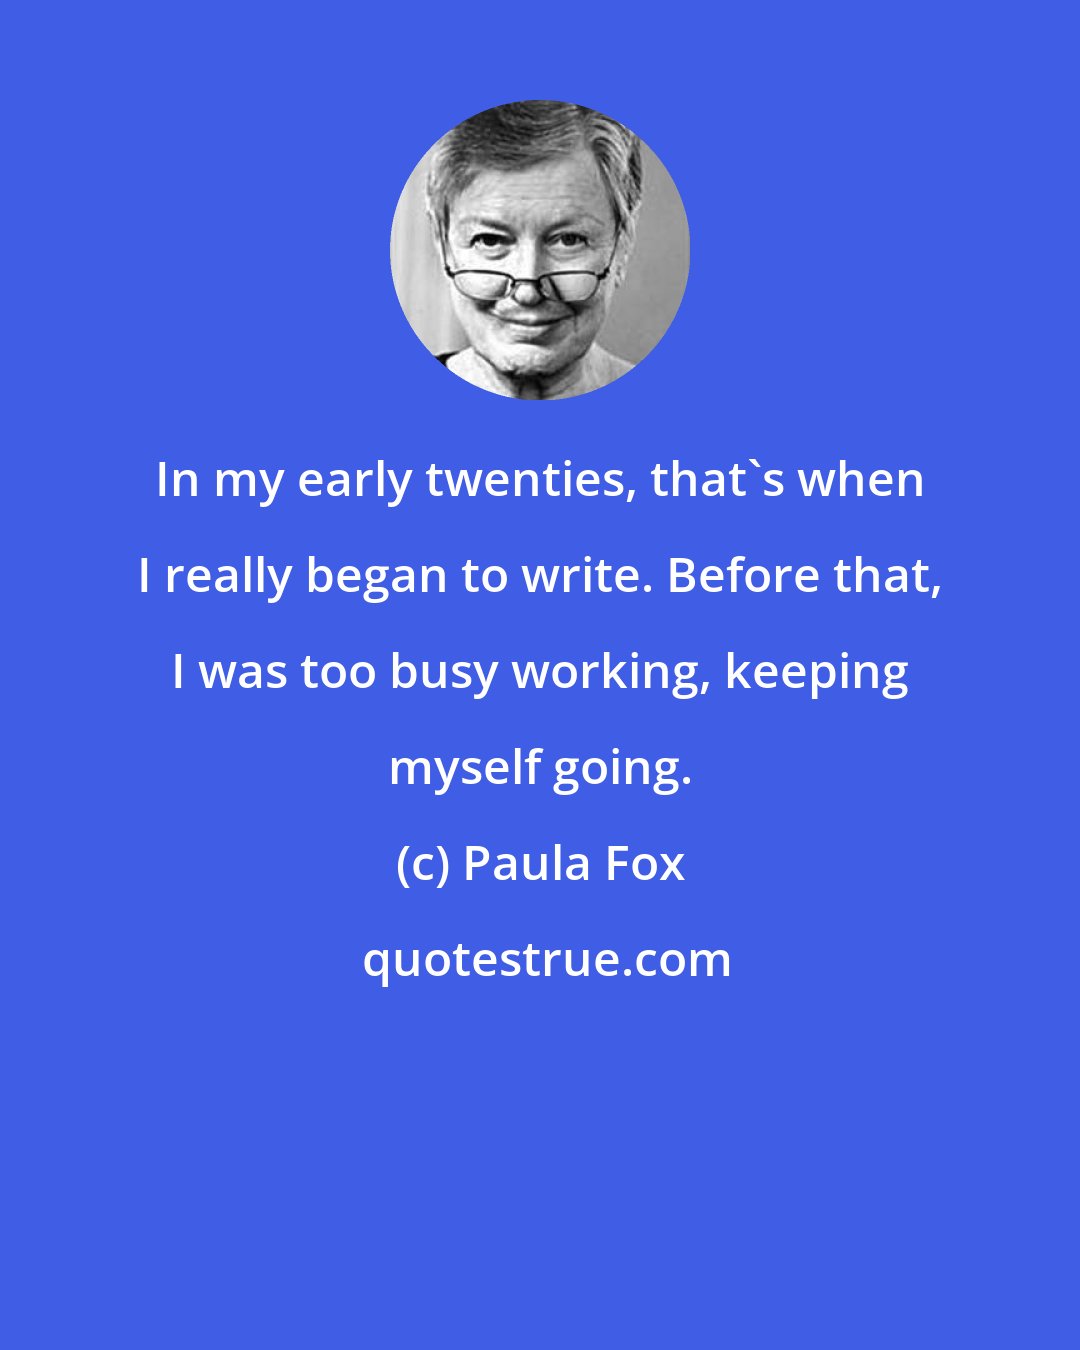 Paula Fox: In my early twenties, that's when I really began to write. Before that, I was too busy working, keeping myself going.